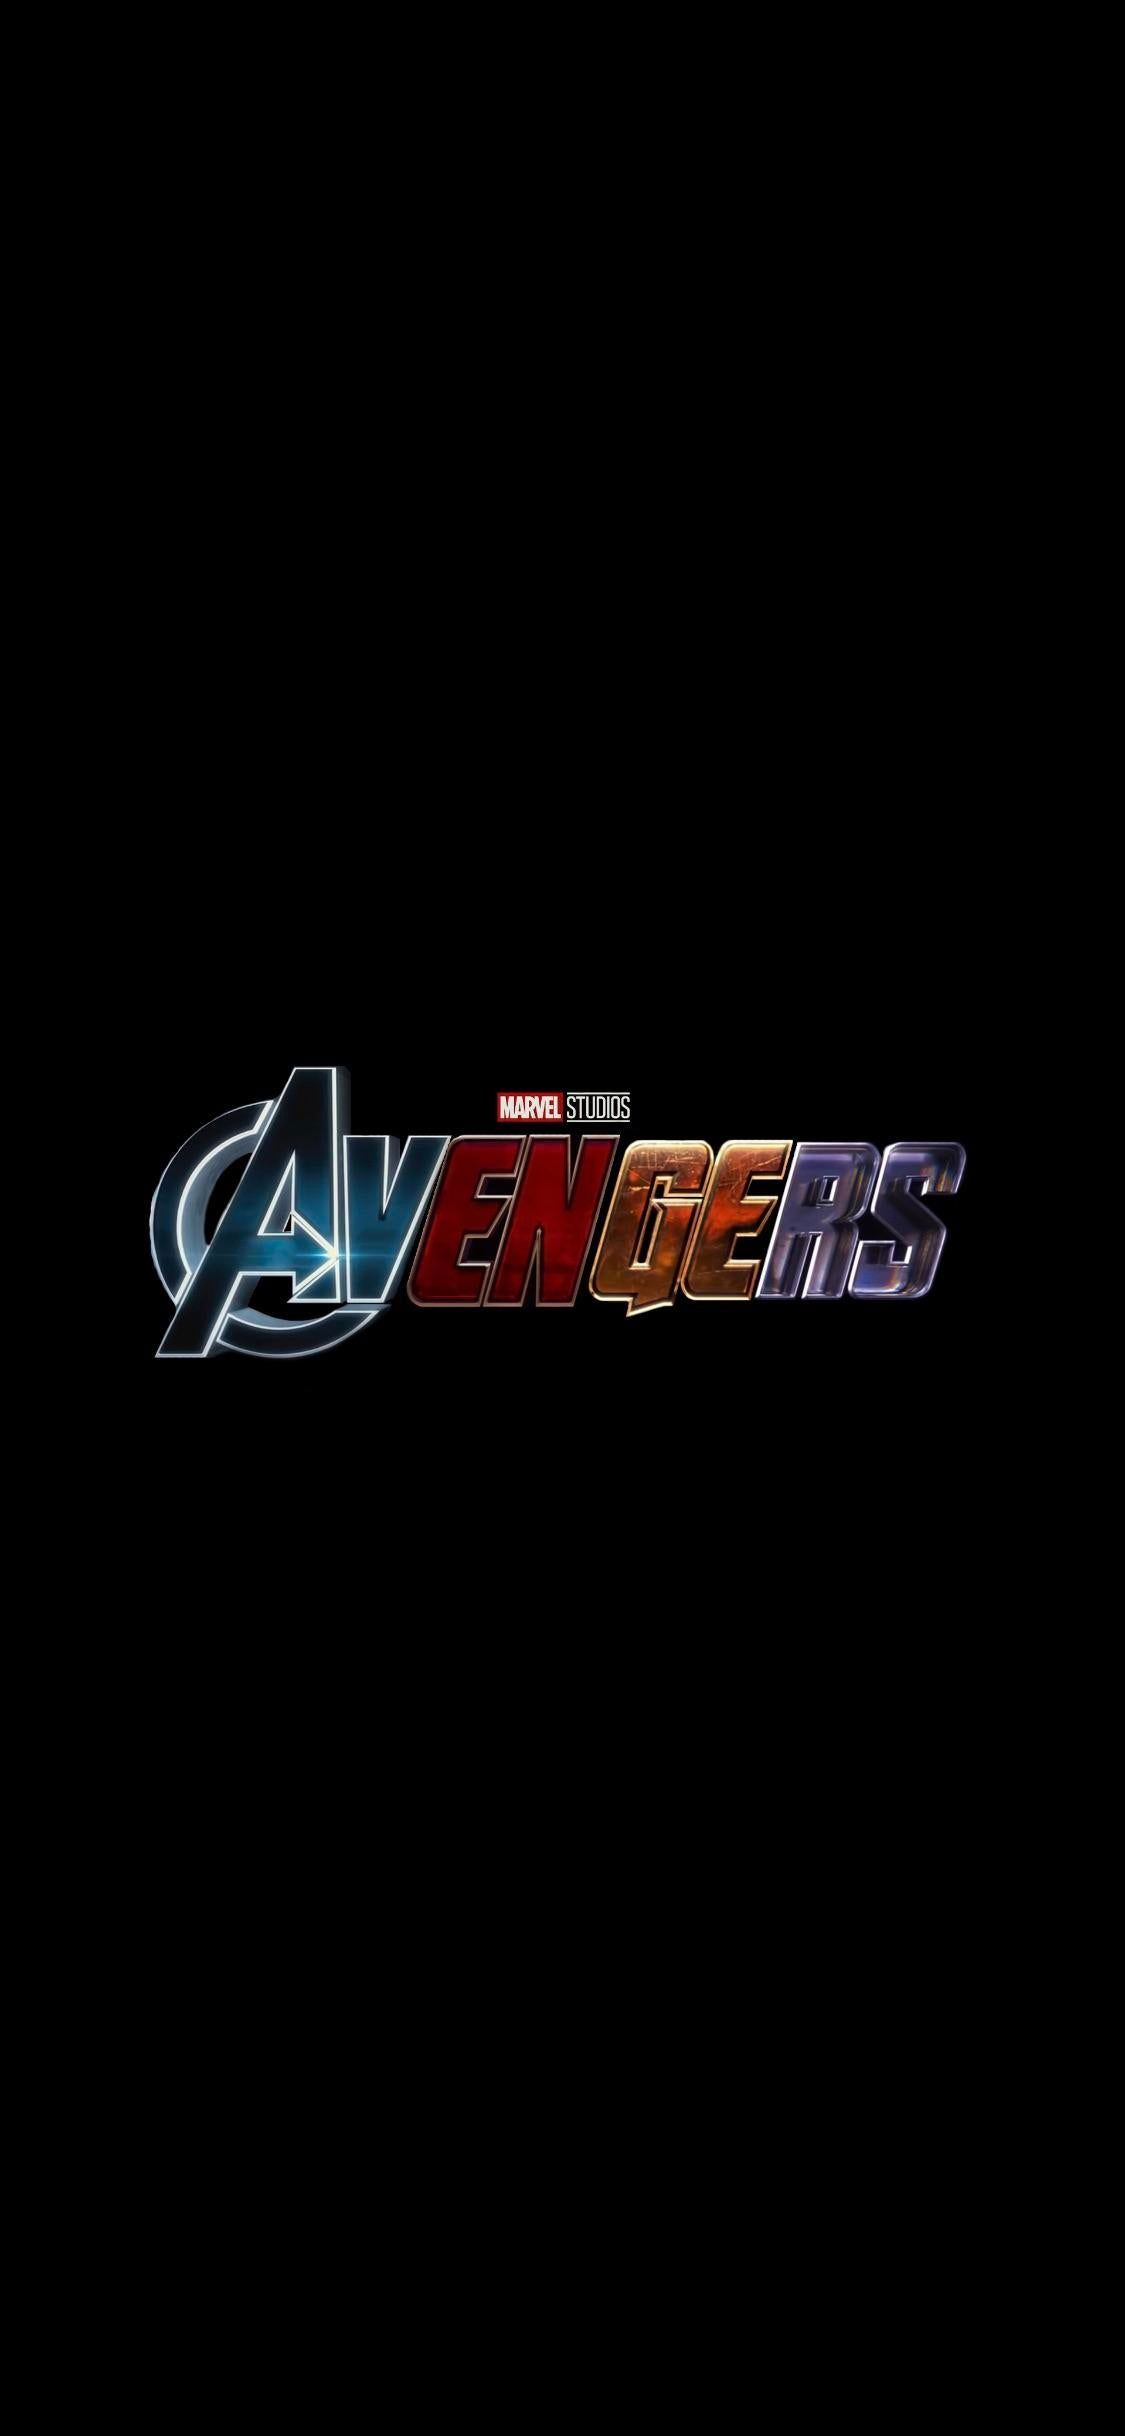 Phone Wallpaper with the all four Avengers logos mended together